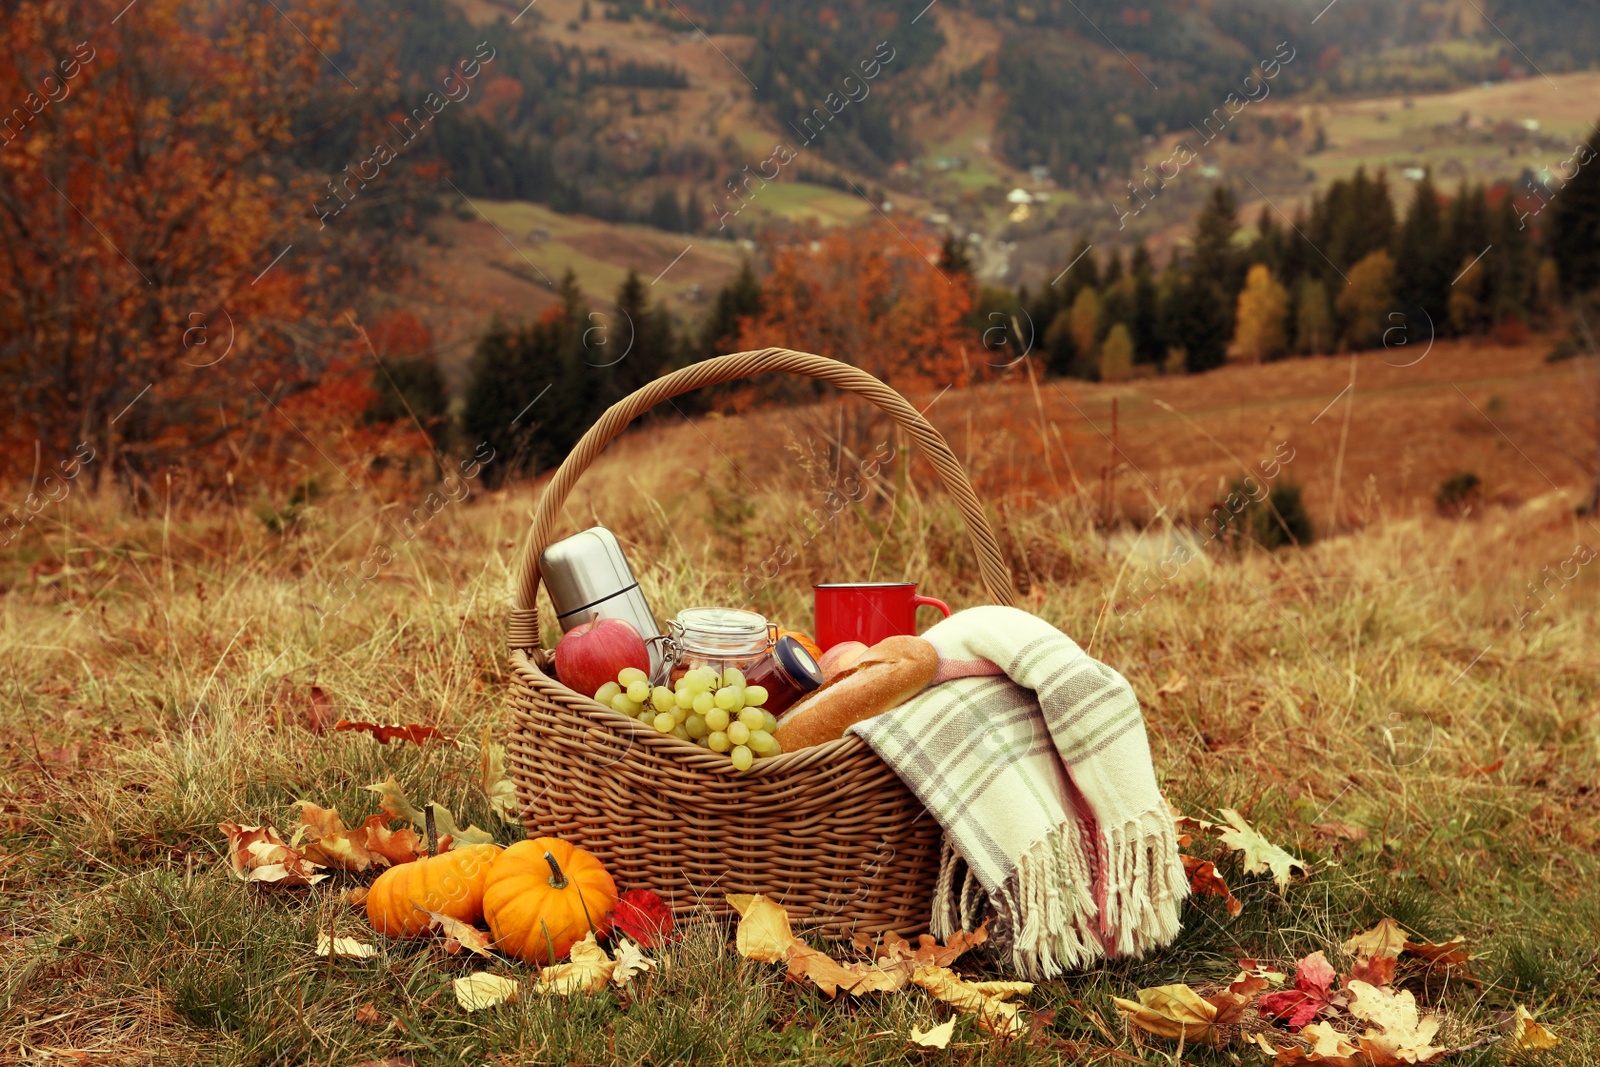 Image of Wicker picnic basket with thermos, snacks and plaid in nature on autumn day